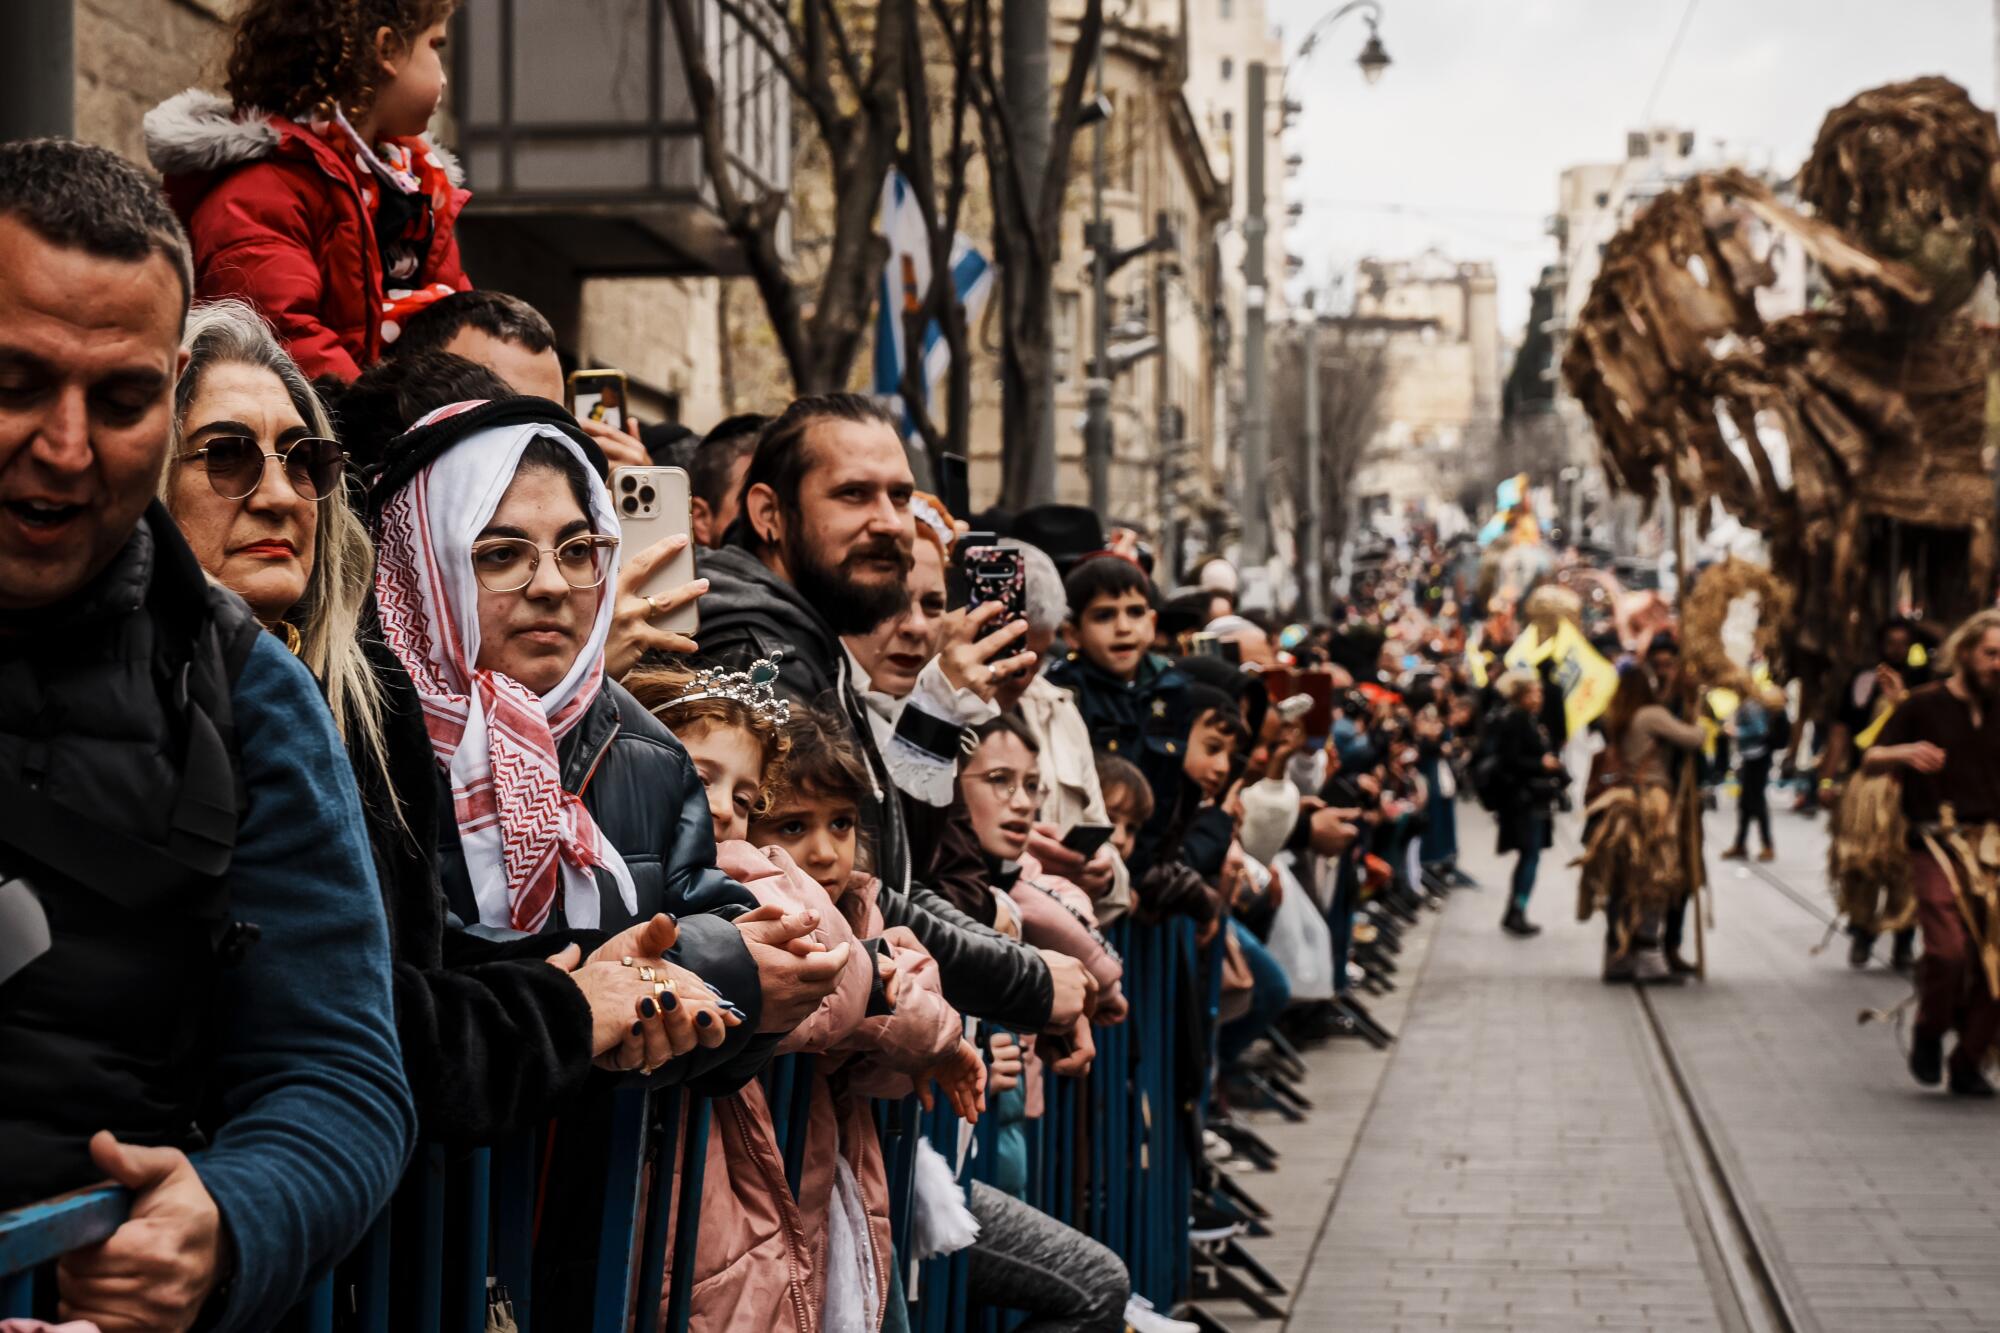 Paradegoers, some in costume, attend a celebration of the Jewish holiday of Purim in Jerusalem.